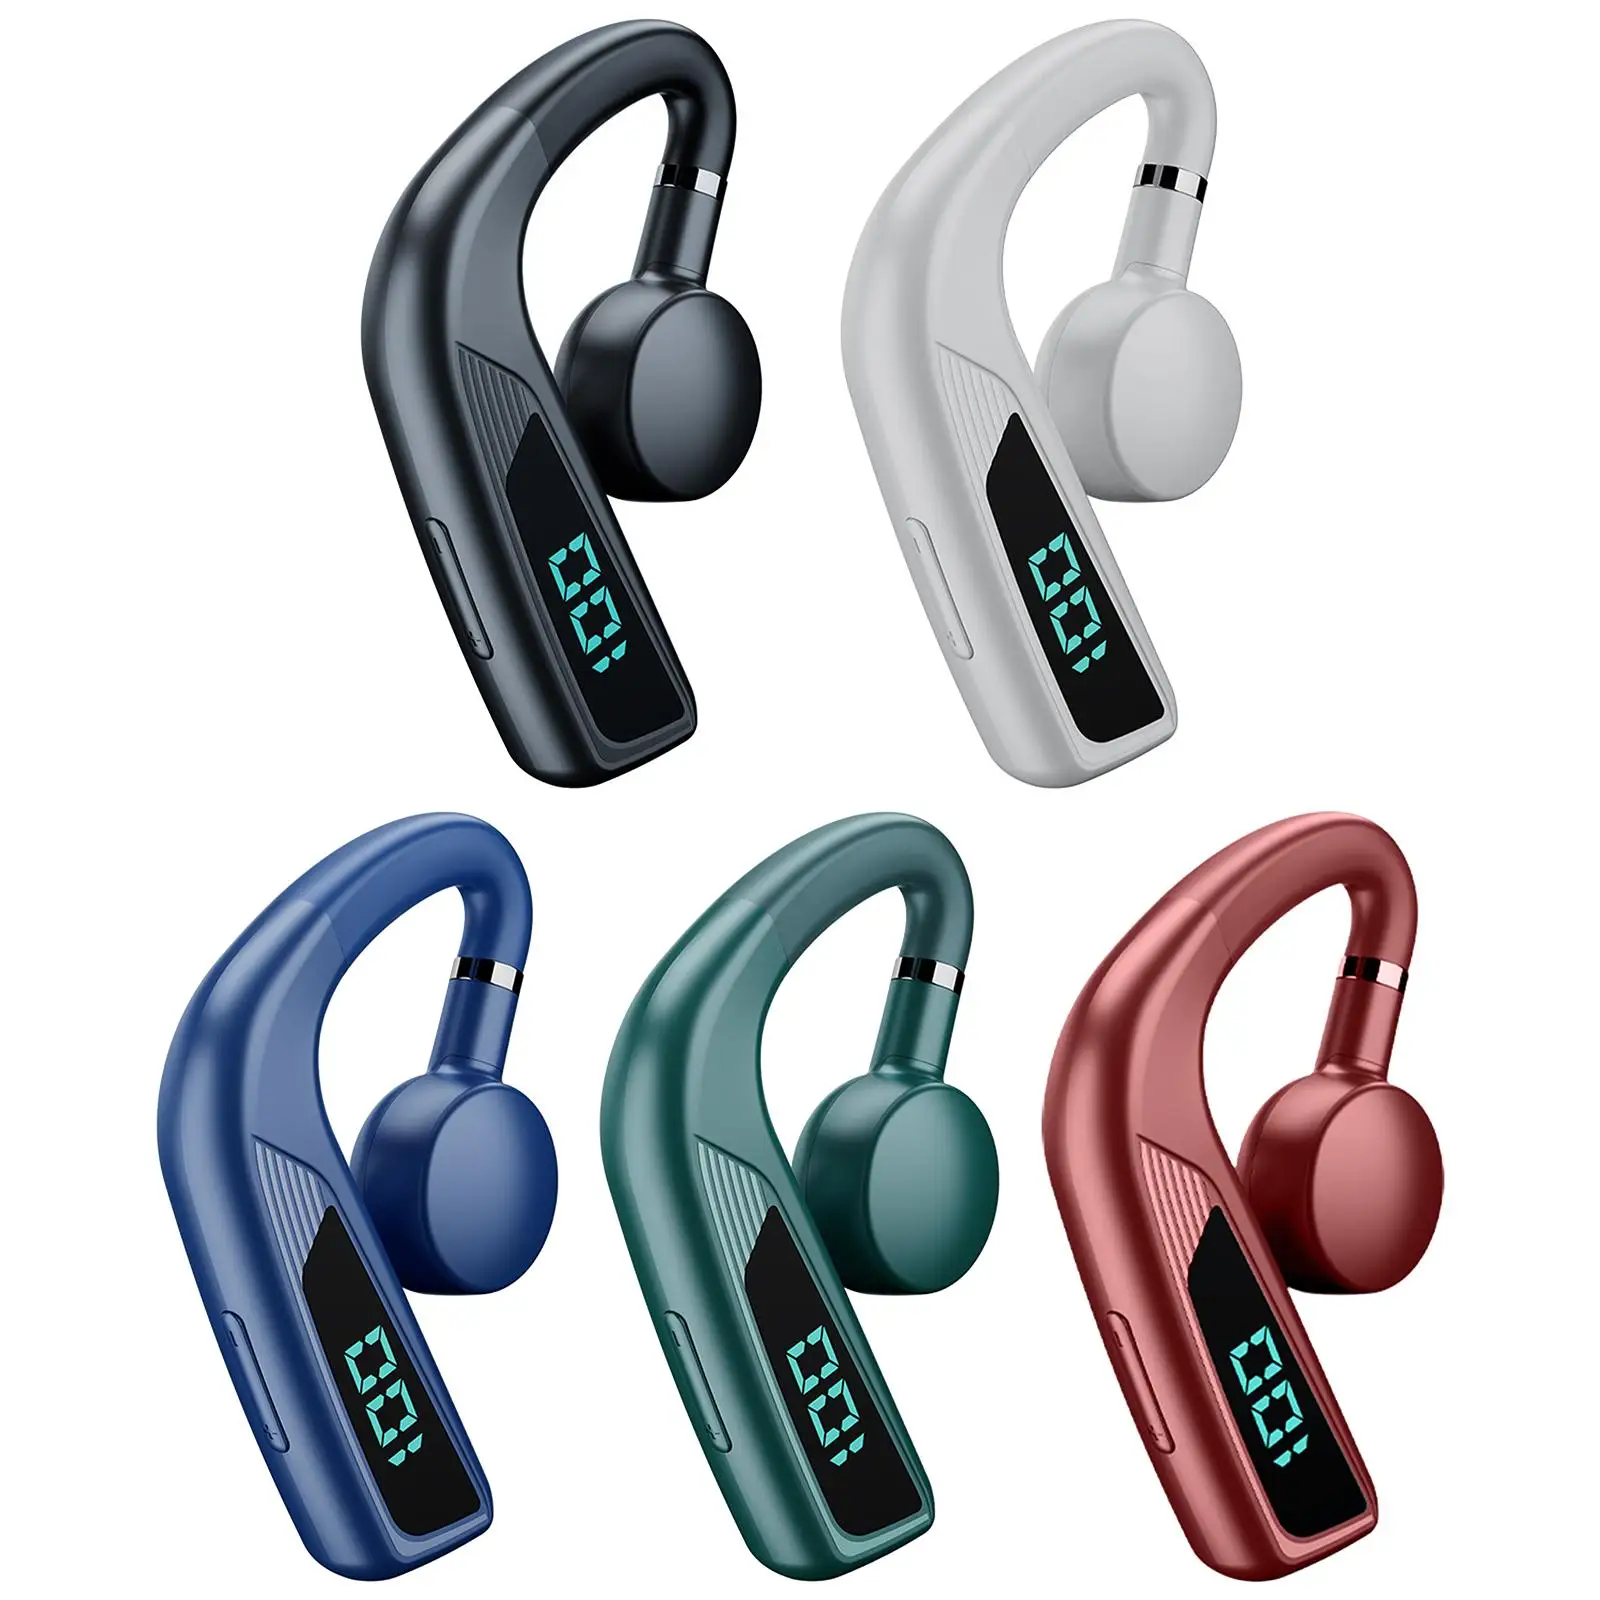 Bluetooth 5.0 Bone Conduction Headphones Sweat Resistant IPX5 Waterproof 30 Hours Music Hands Free Earpiece for Hiking Driving